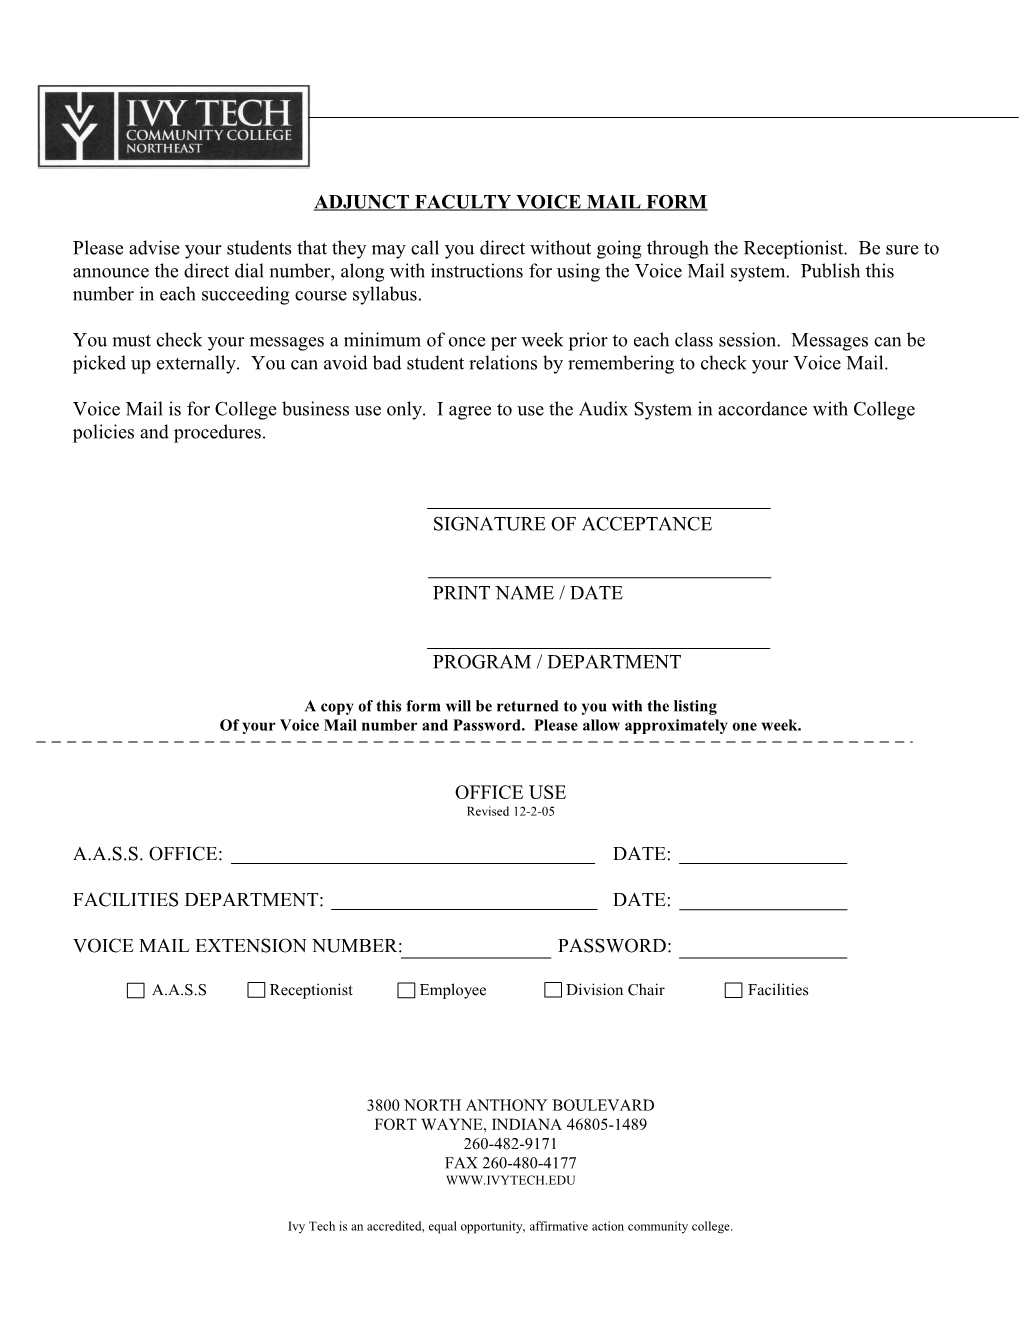 Adjunct Faculty Voice Mail Form